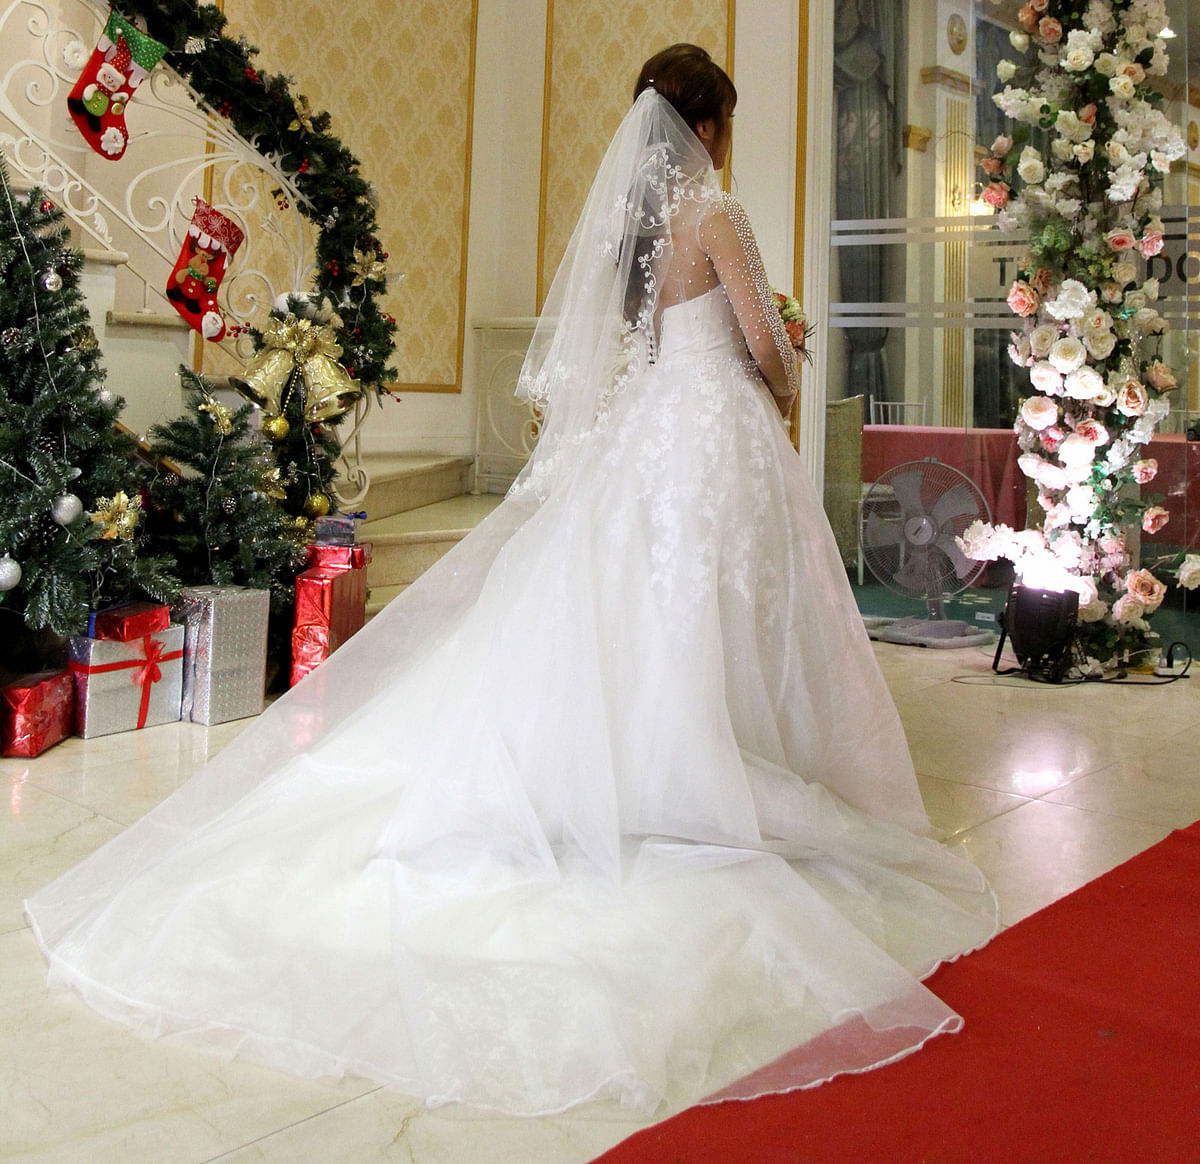 In this picture taken on January 23, 2018, Vietnamese bride Huong enters the wedding hall for the ceremony in Hanoi. Young couples are shelling out thousands of dollars to rent parents, aunts, uncles, godparents and friends to appease familial pressure to get married or avoid clashes between in-laws who disapprove of the union.